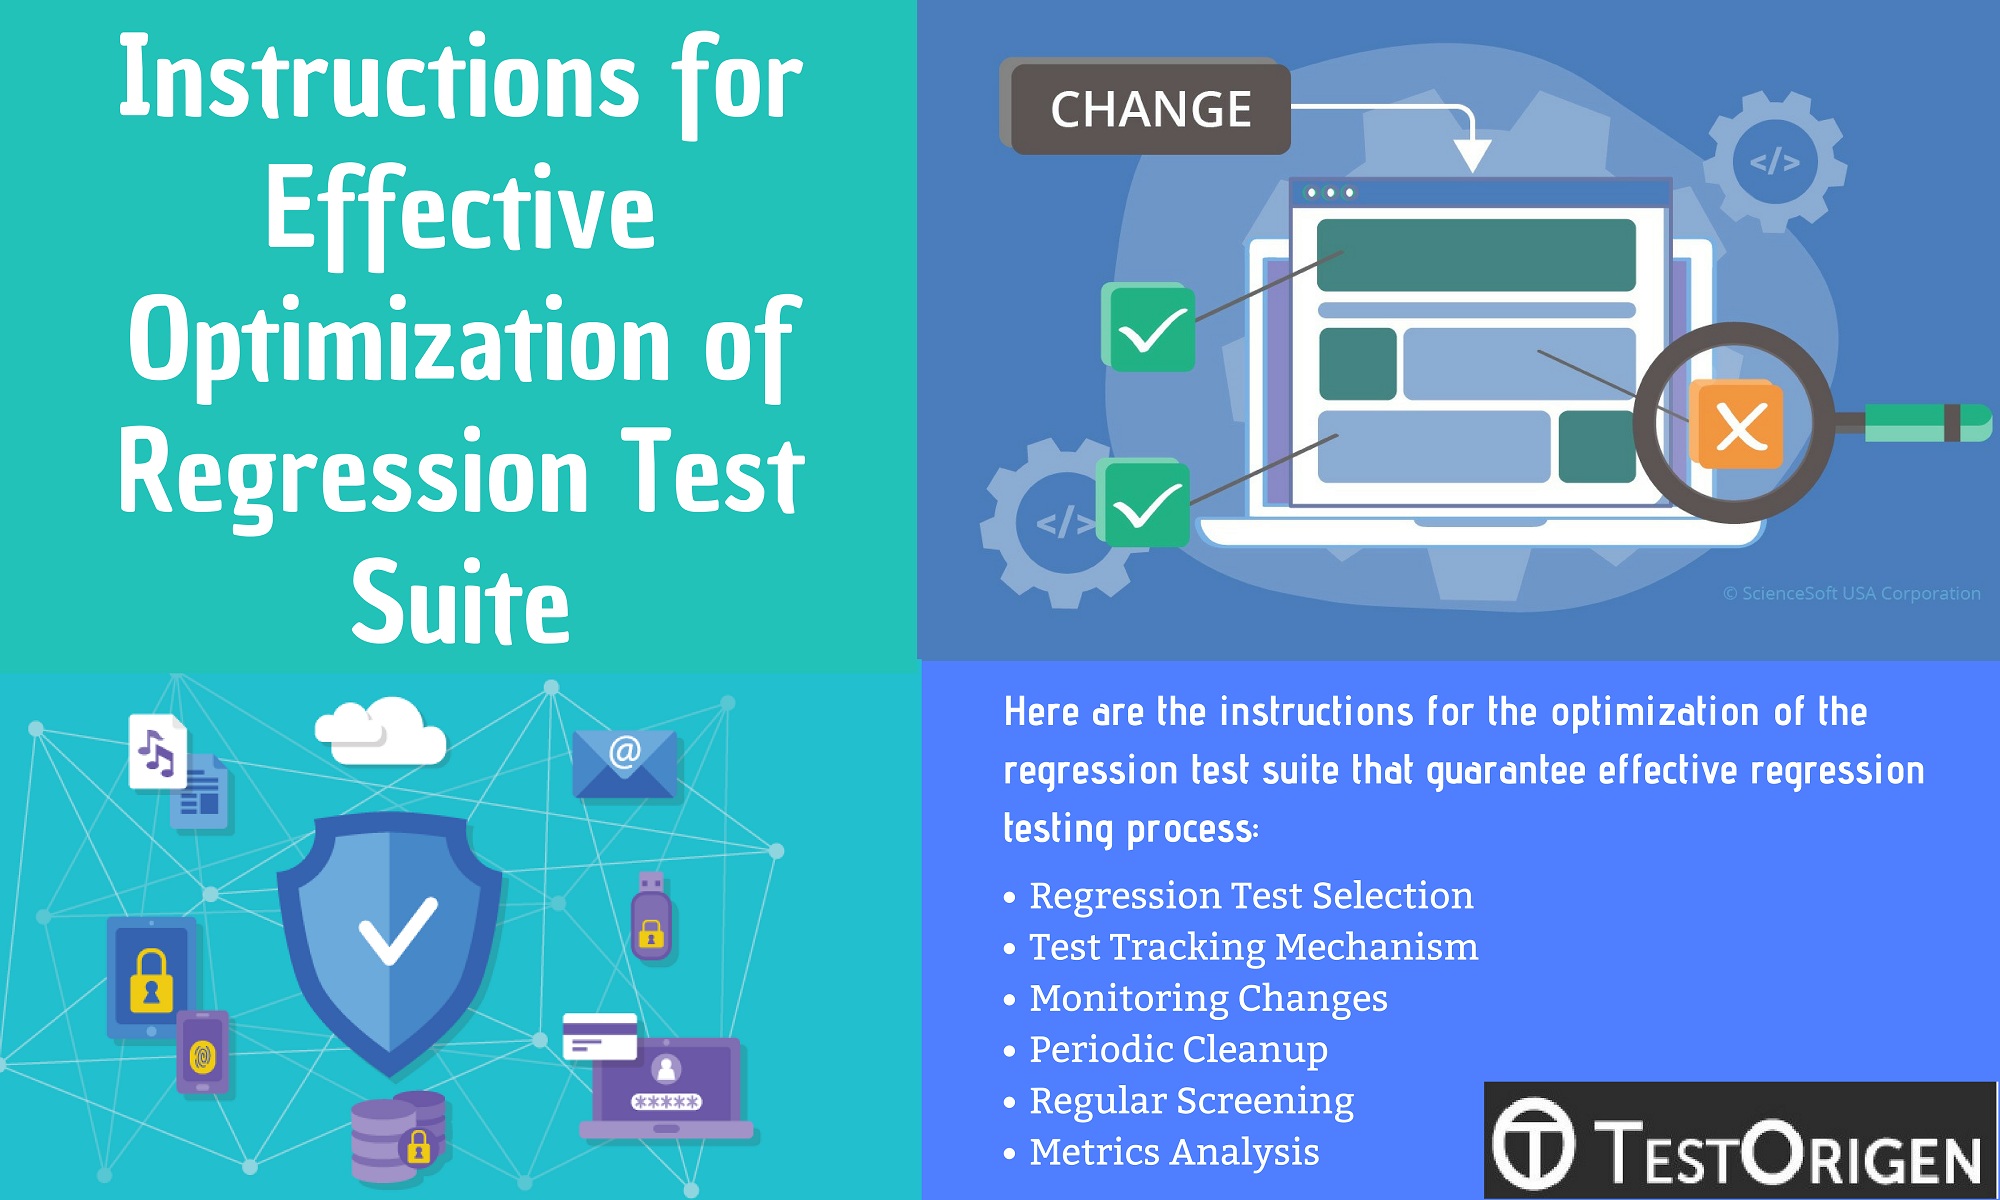 Instructions for Effective Optimization of Regression Test Suite